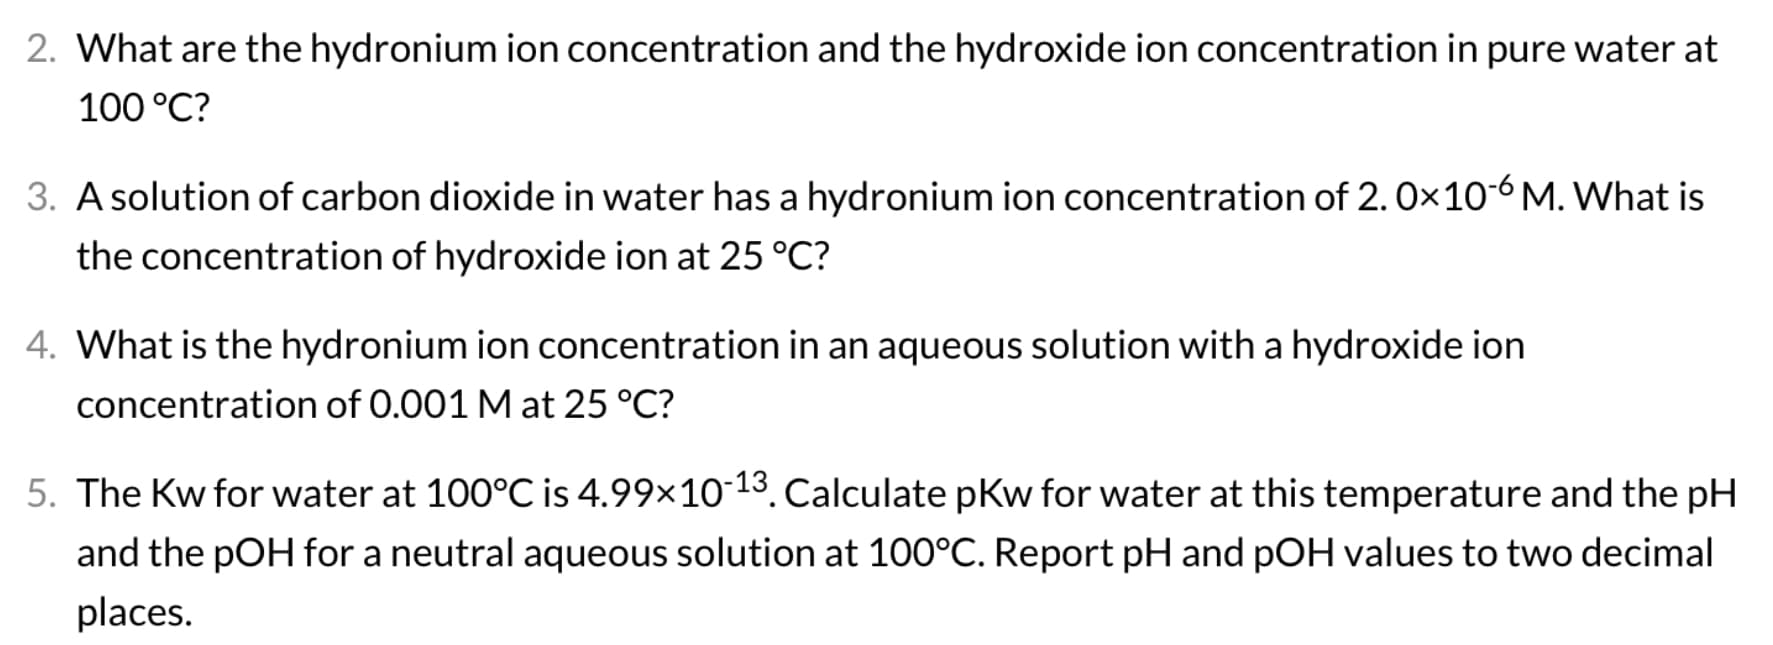 2. What are the hydronium ion concentration and the hydroxide ion concentration in pure water at
100 °C?
3. A solution of carbon dioxide in water has a hydronium ion concentration of 2. 0x10-6 M. What is
the concentration of hydroxide ion at 25 °C?
4. What is the hydronium ion concentration in an aqueous solution with a hydroxide ion
concentration of 0.001 M at 25 °C?
5. The Kw for water at 100°C is 4.99×10-13. Calculate pkw for water at this temperature and the pH
and the pOH for a neutral aqueous solution at 100°C. Report pH and pOH values to two decimal
places.
